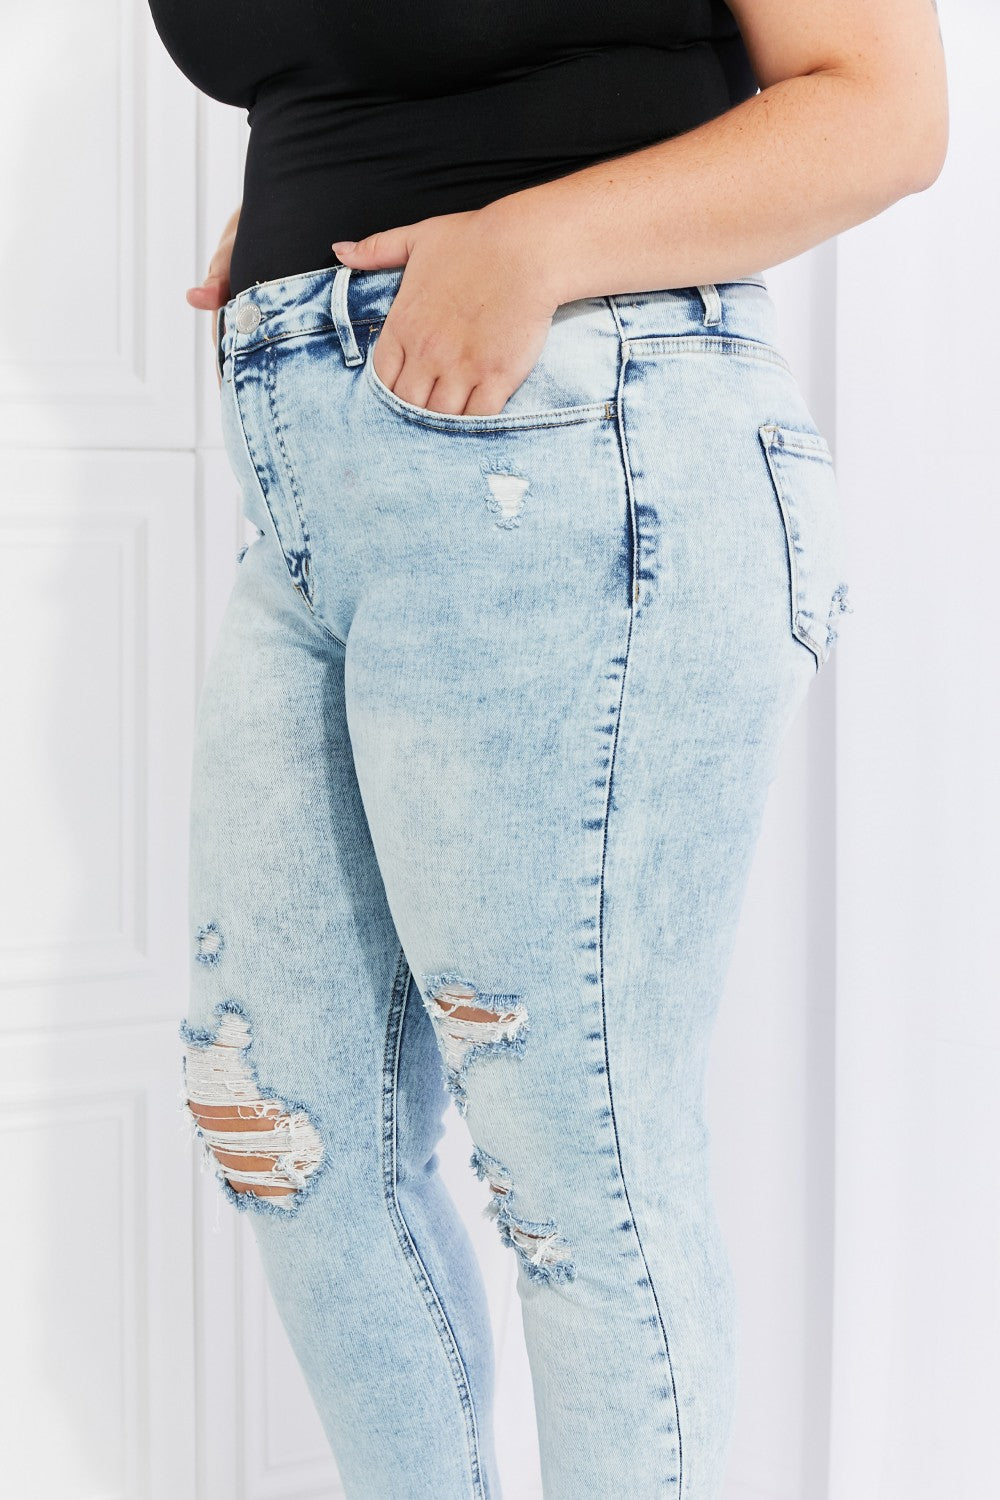 VERVET on the Road Distressed Jeans